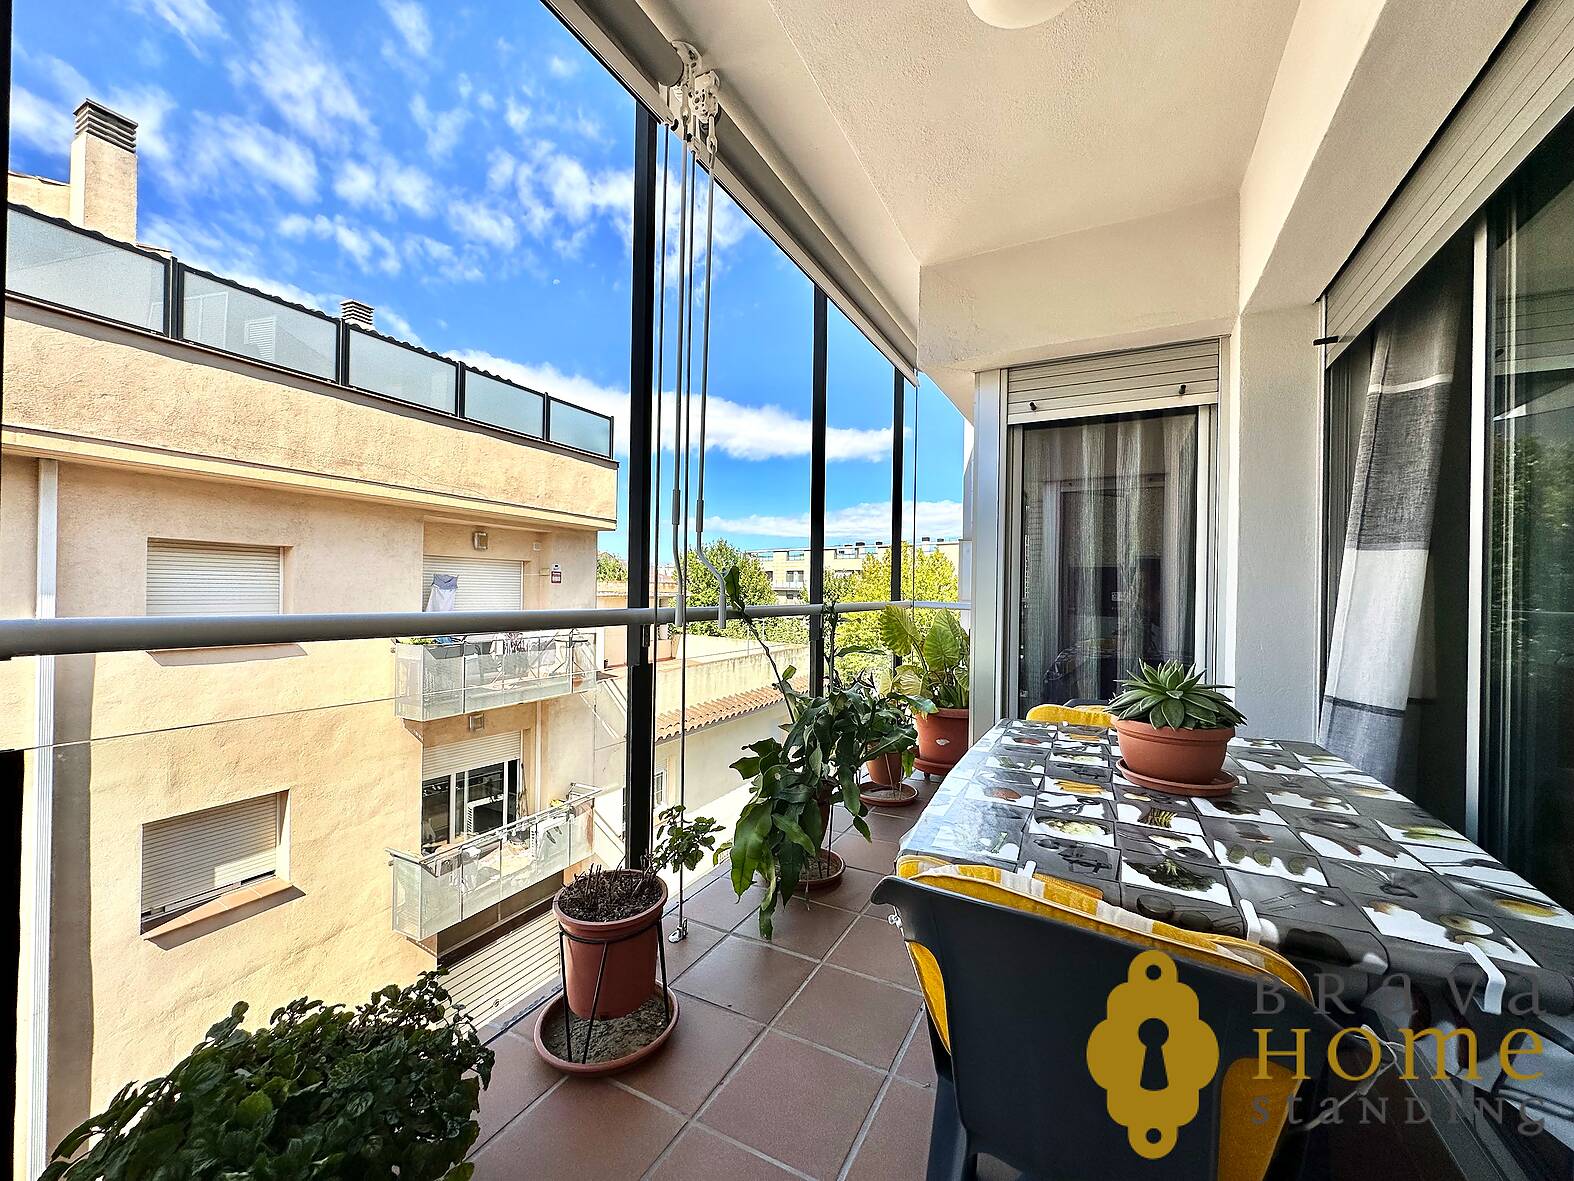 Superb apartment for sale in the center of Rosas